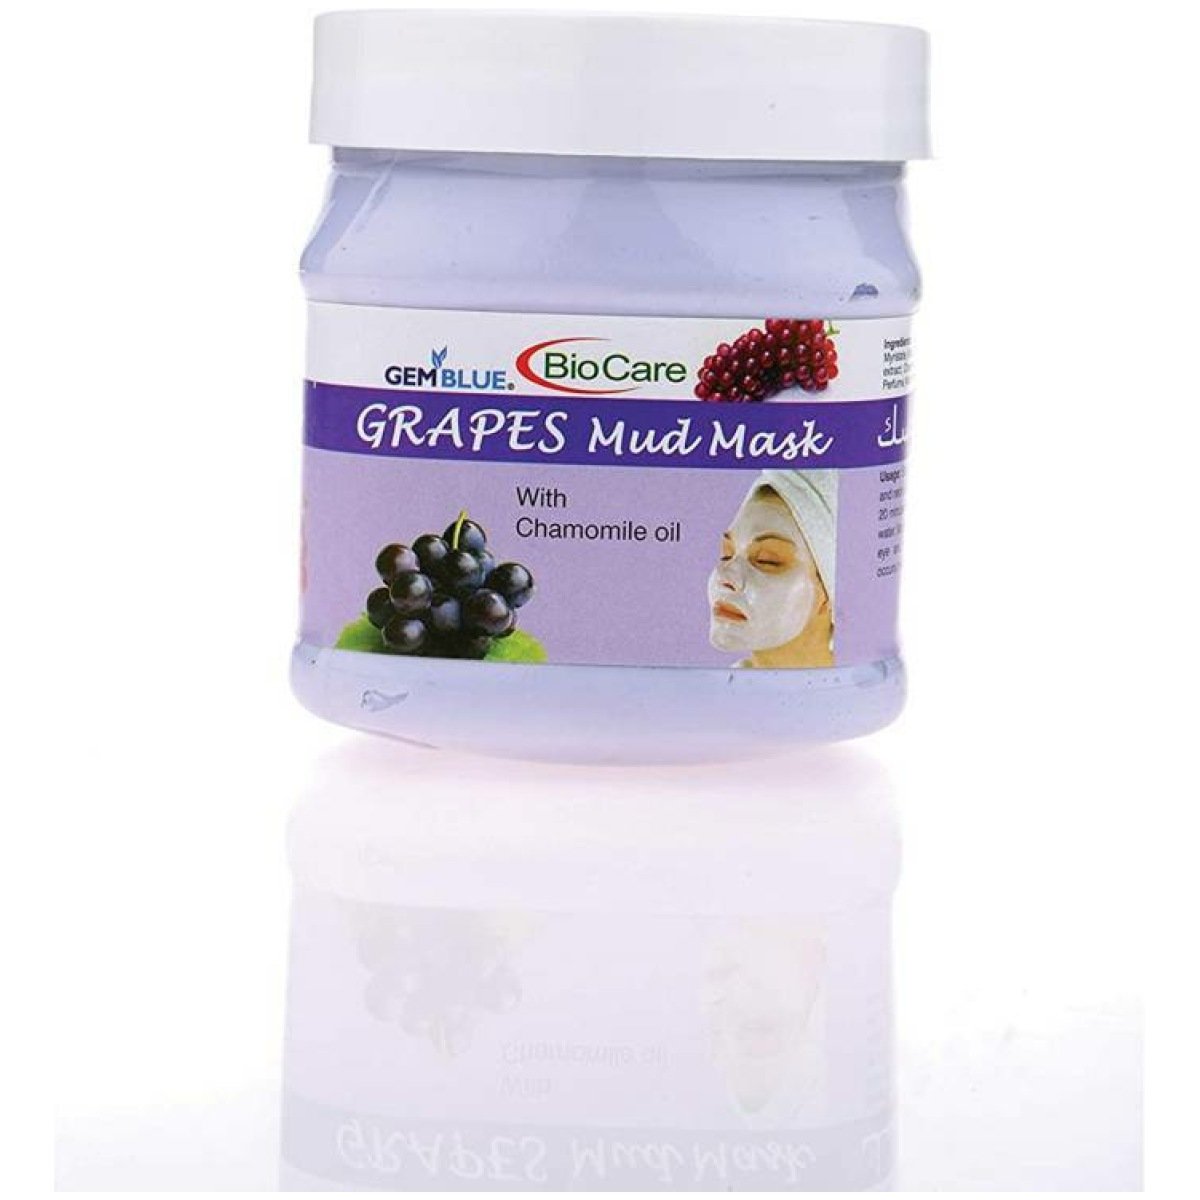 Gemblue Biocare Grapes And Mud Face Mask 50ml